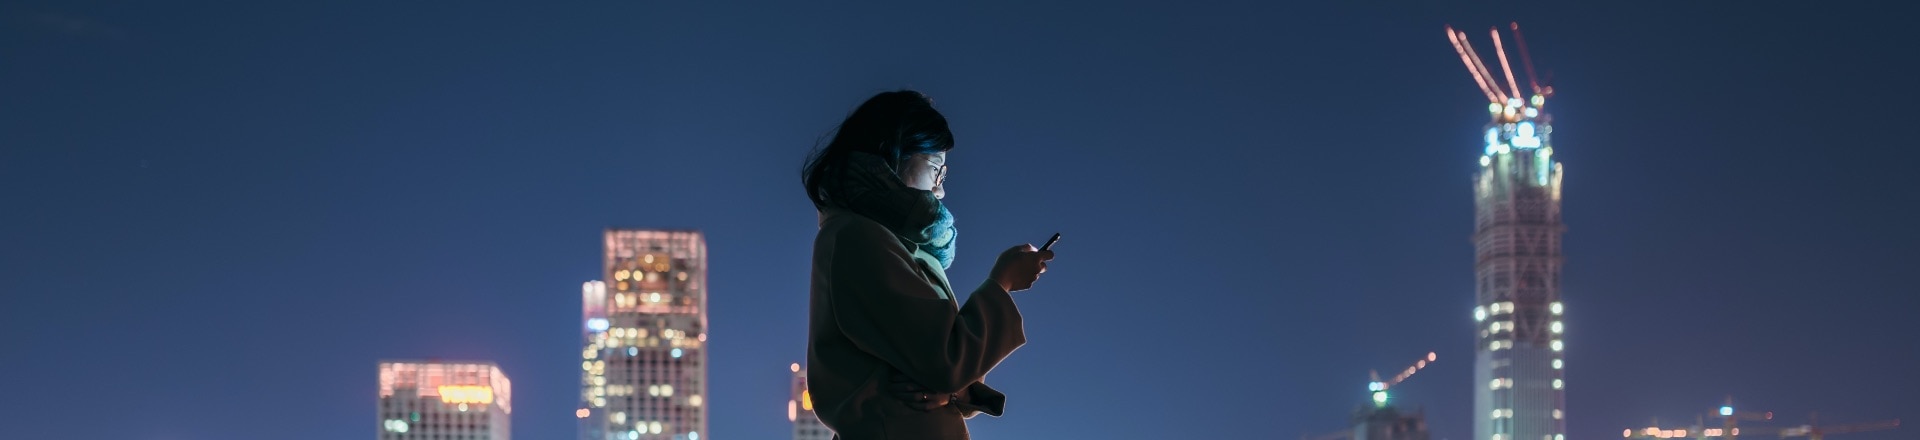 A person standing silhouetted against a city at night